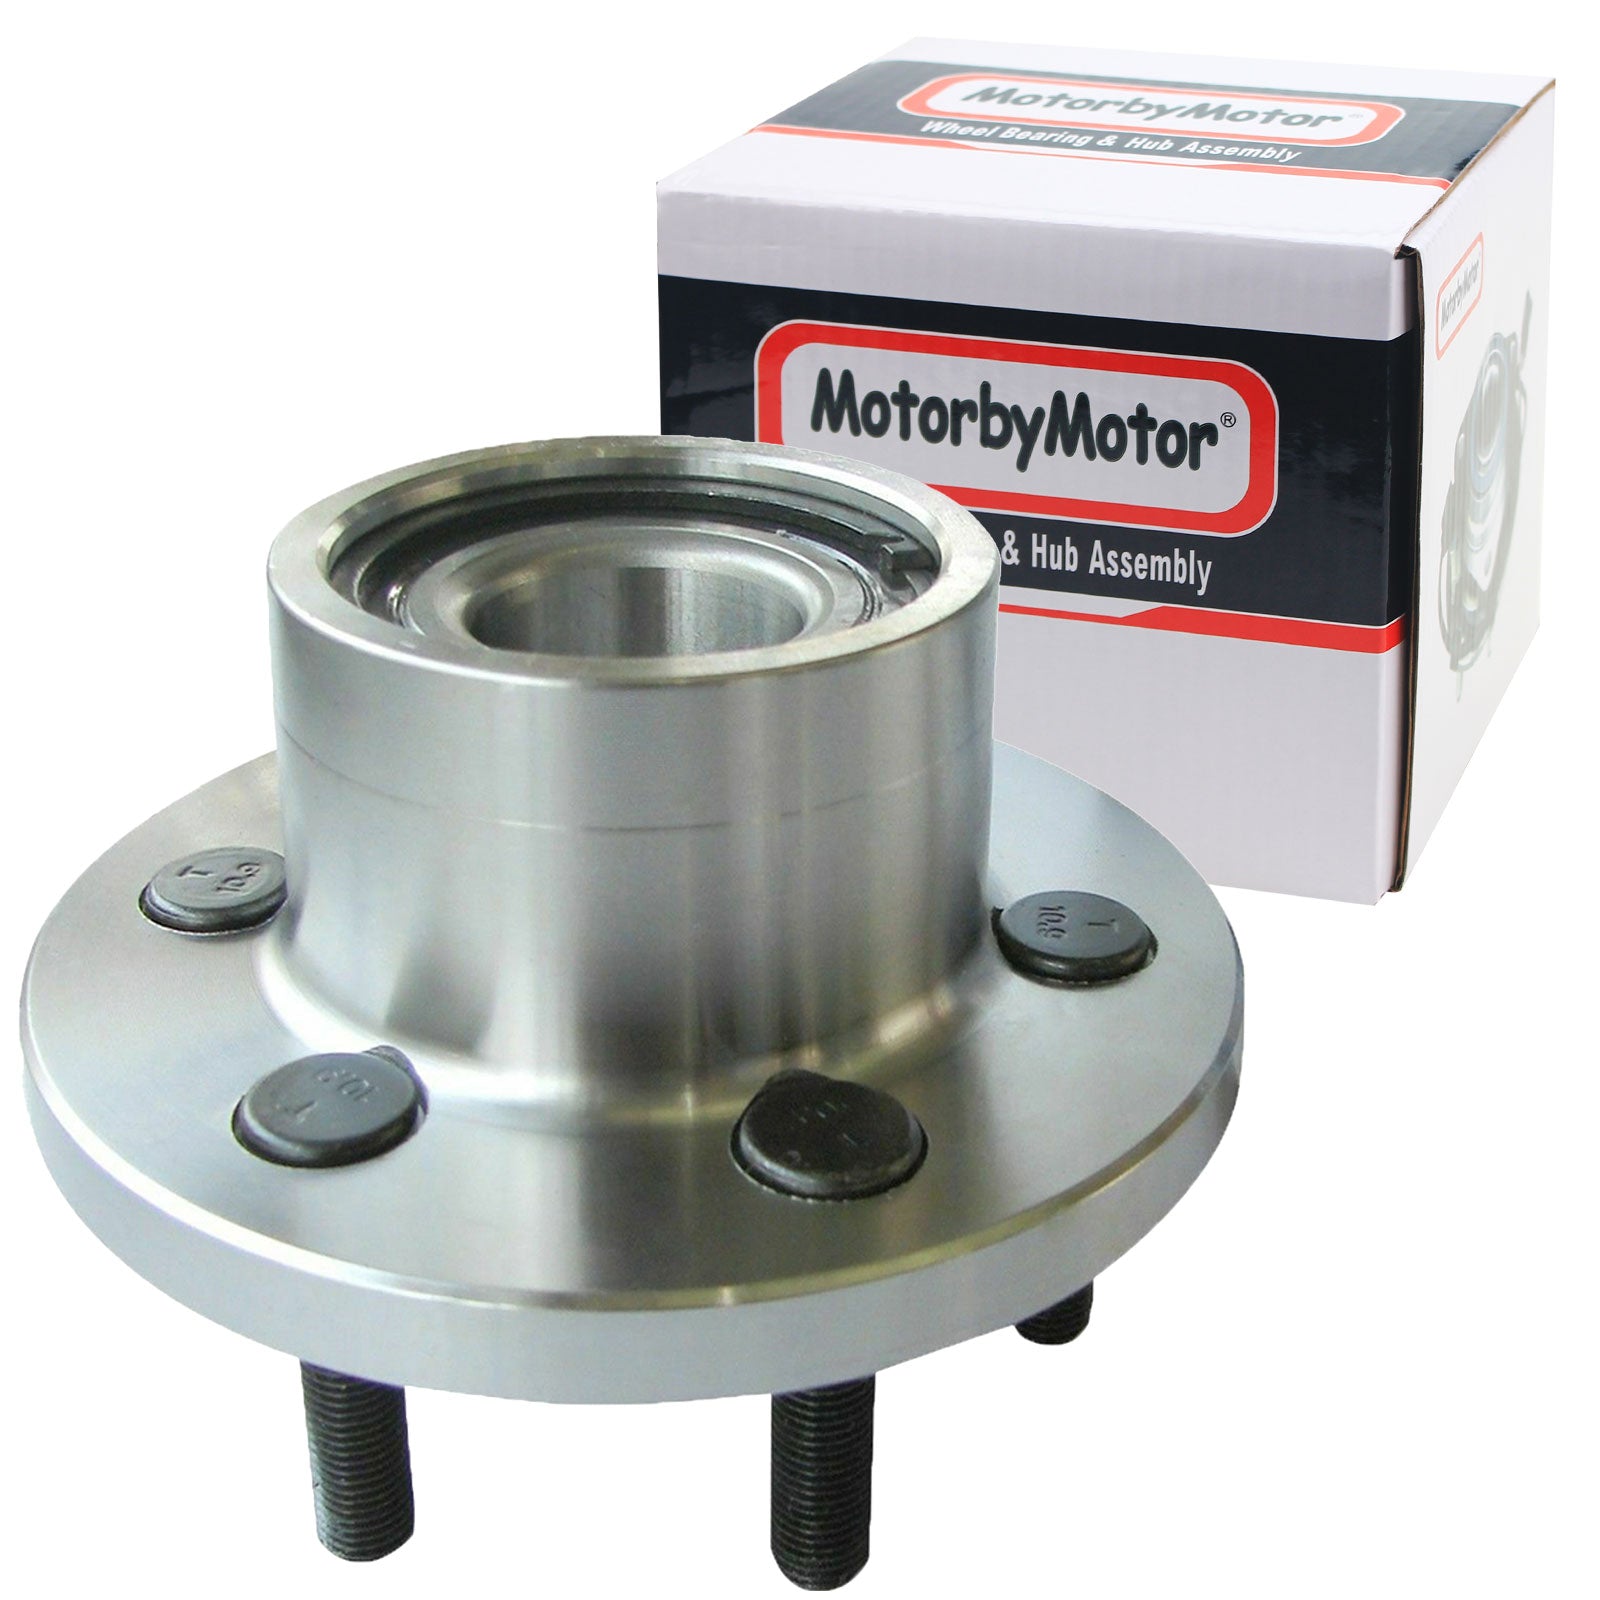 MotorbyMotor 515032 Front Wheel Bearing and Hub Assembly 2WD with 6 Lugs Fits for 1999-2003 Dodge Durango, 1997-2004 Dodge Dakota Hub Bearing (2WD RWD, w/2-Wheel ABS)-2PK MotorbyMotor